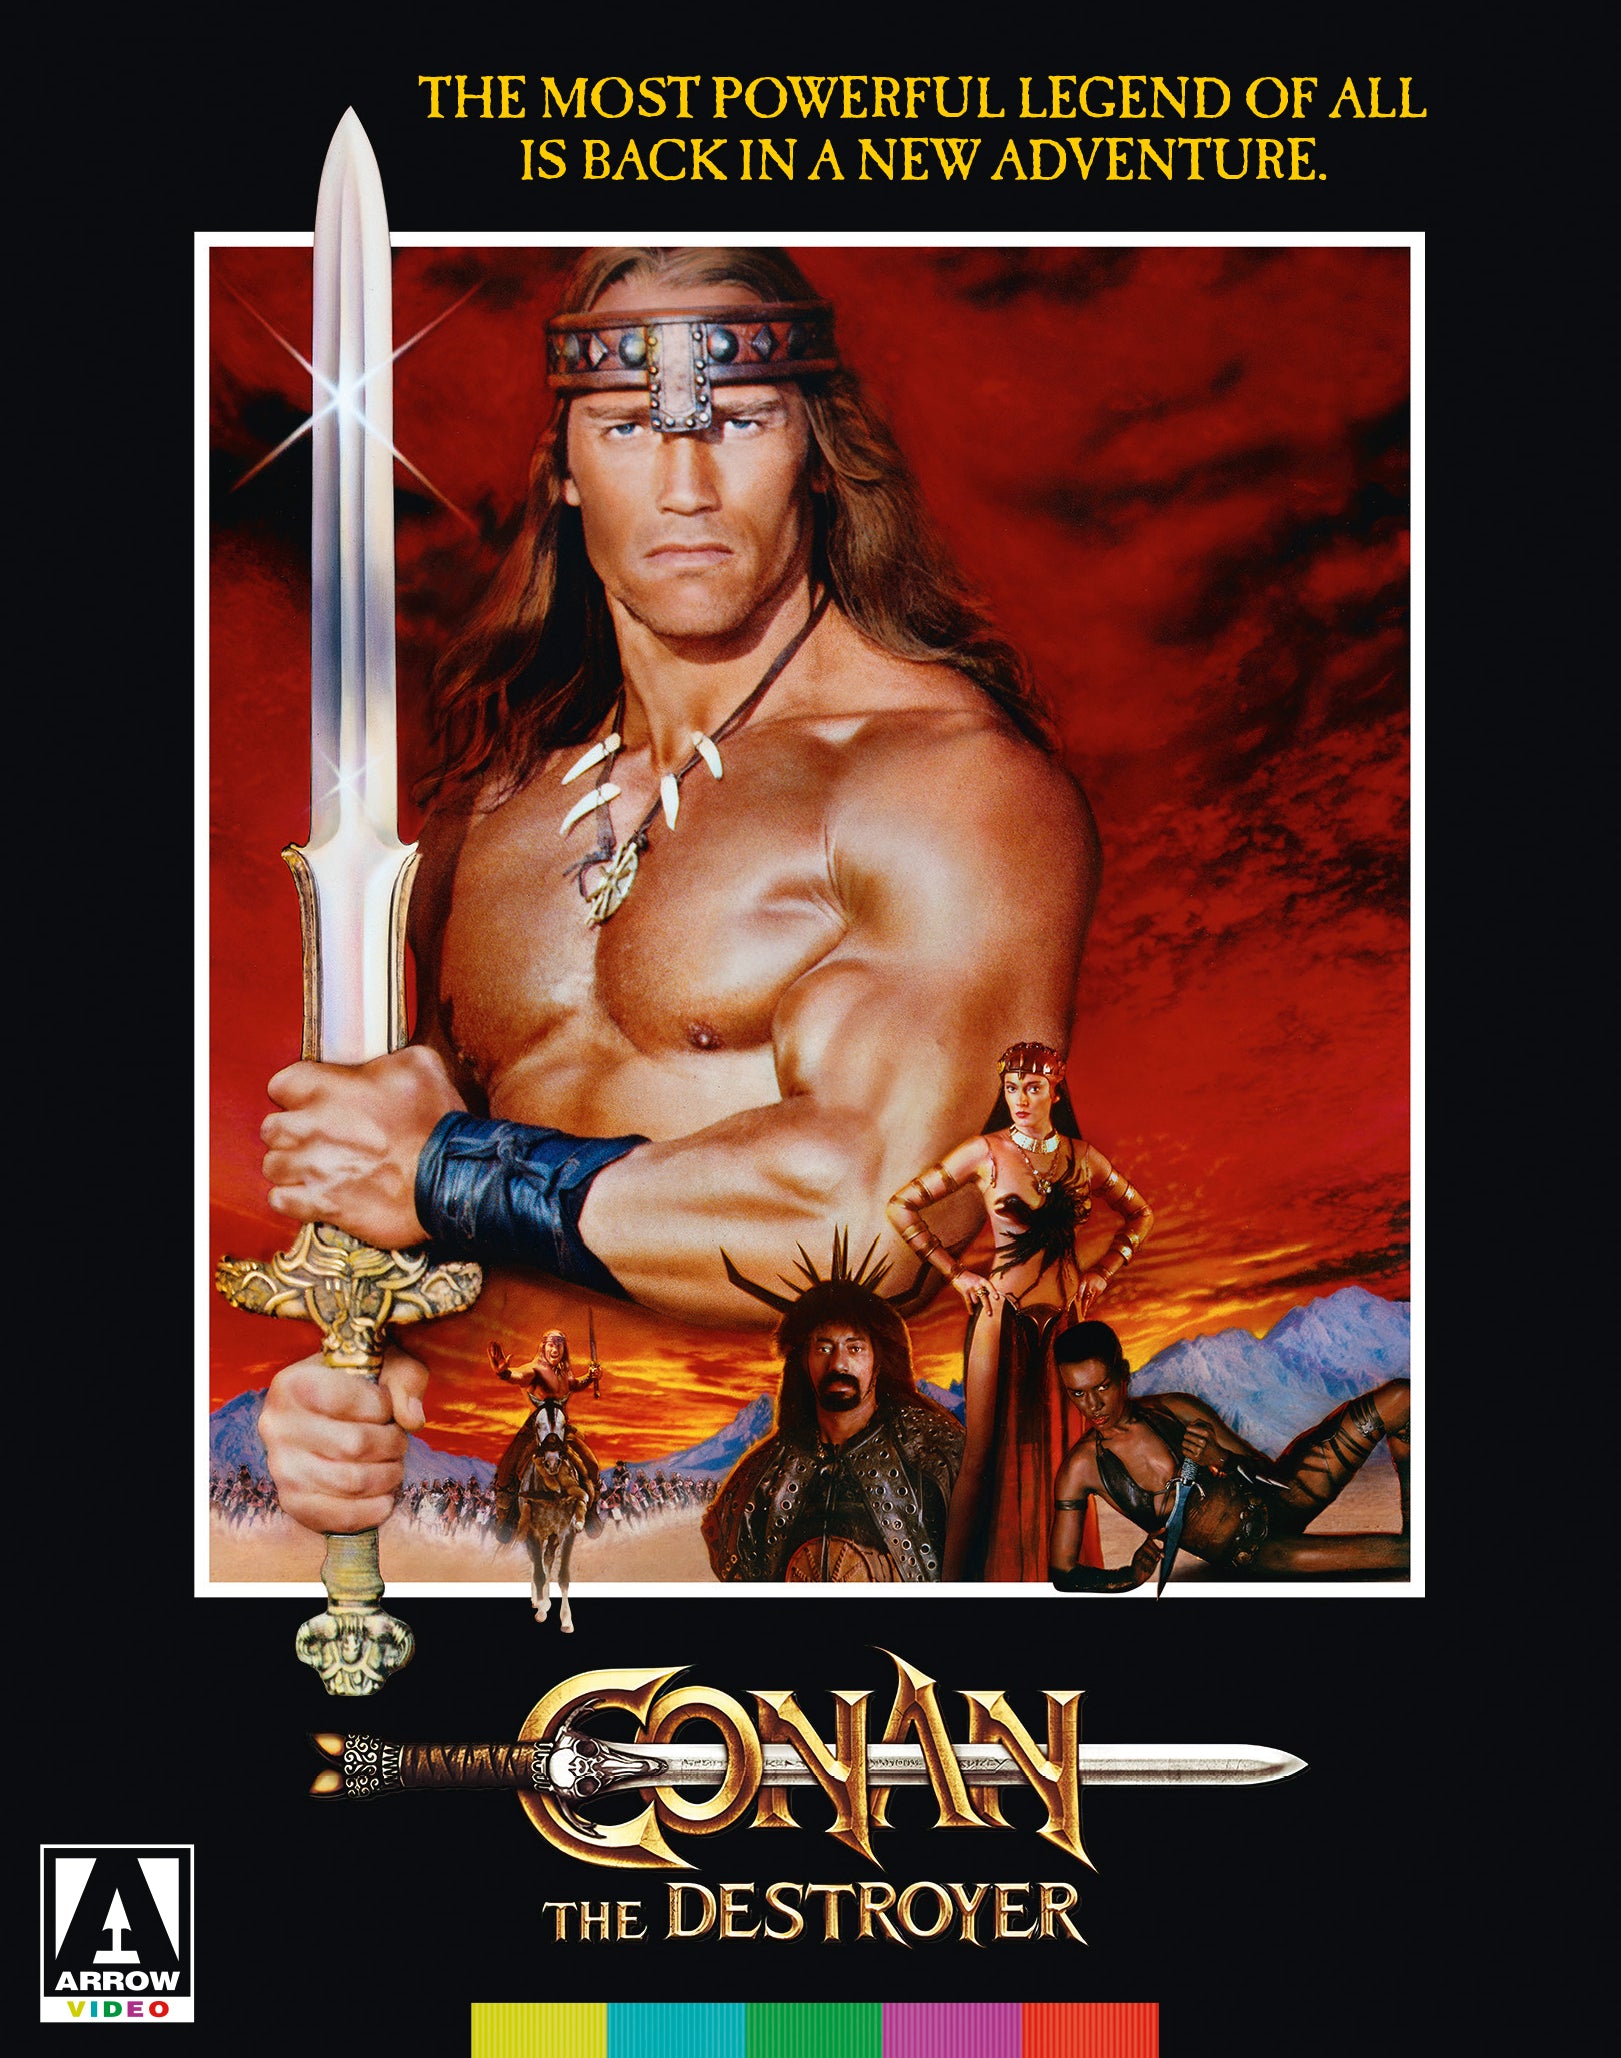 CONAN THE DESTROYER (LIMITED EDITION) BLU-RAY